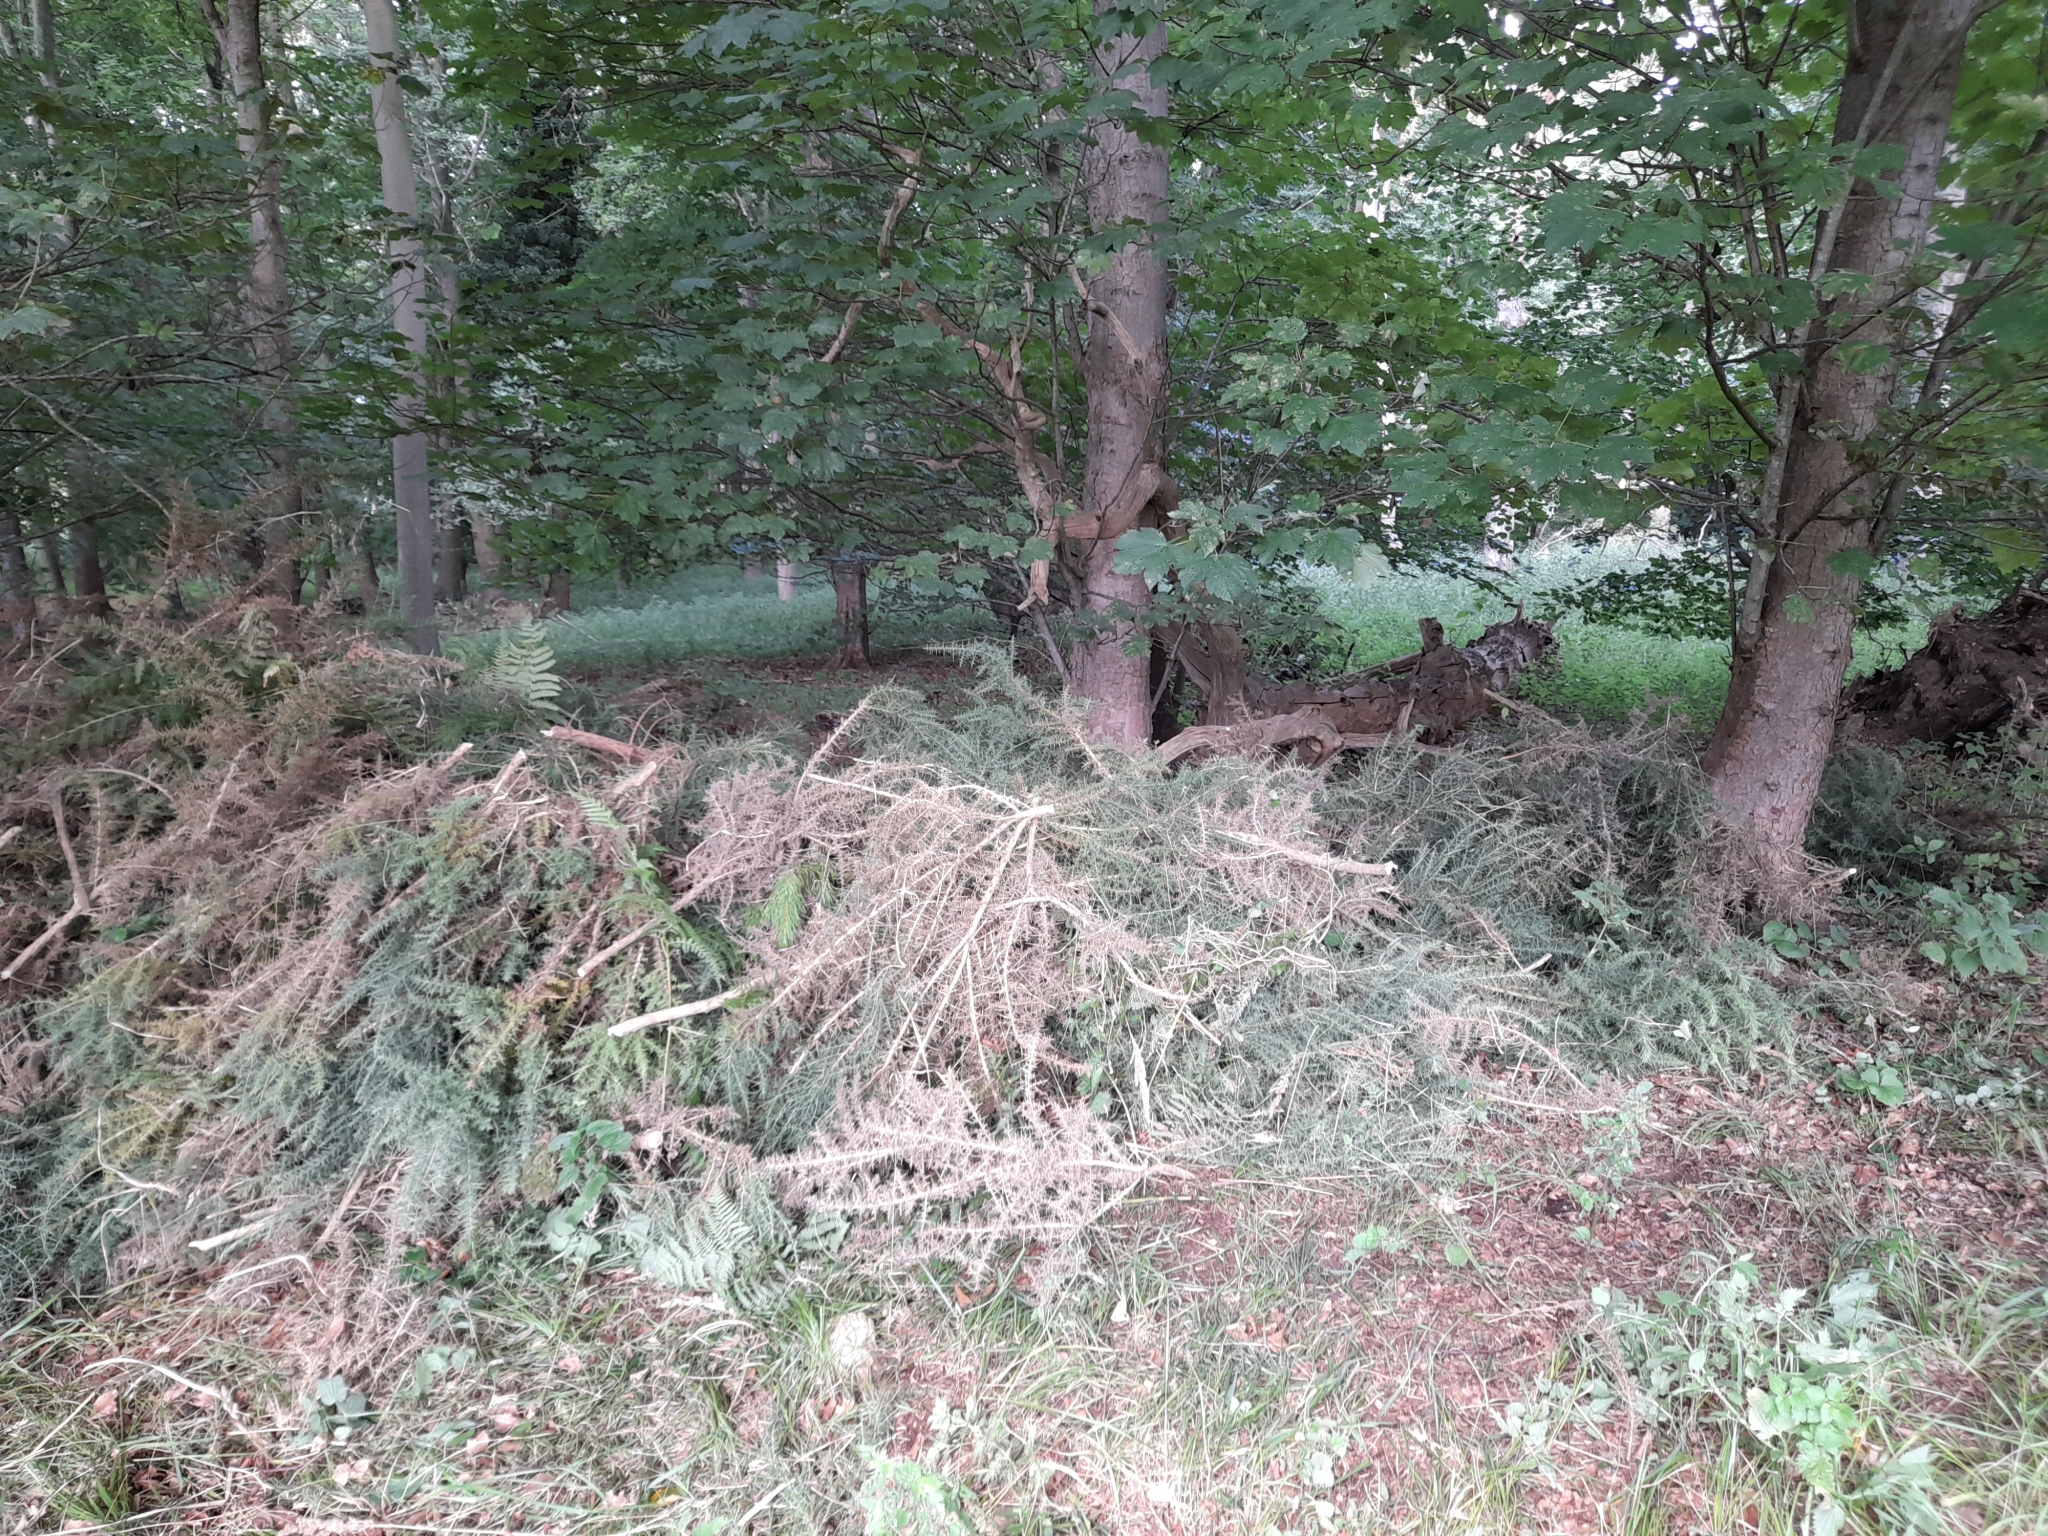 A photo from the FoTF Conservation Event - August 2021 - Maintenance tasks at Mildenhall Mugwort Pit & Mildenhall Warren Lodge : A pile of removed Gorse under the treeline